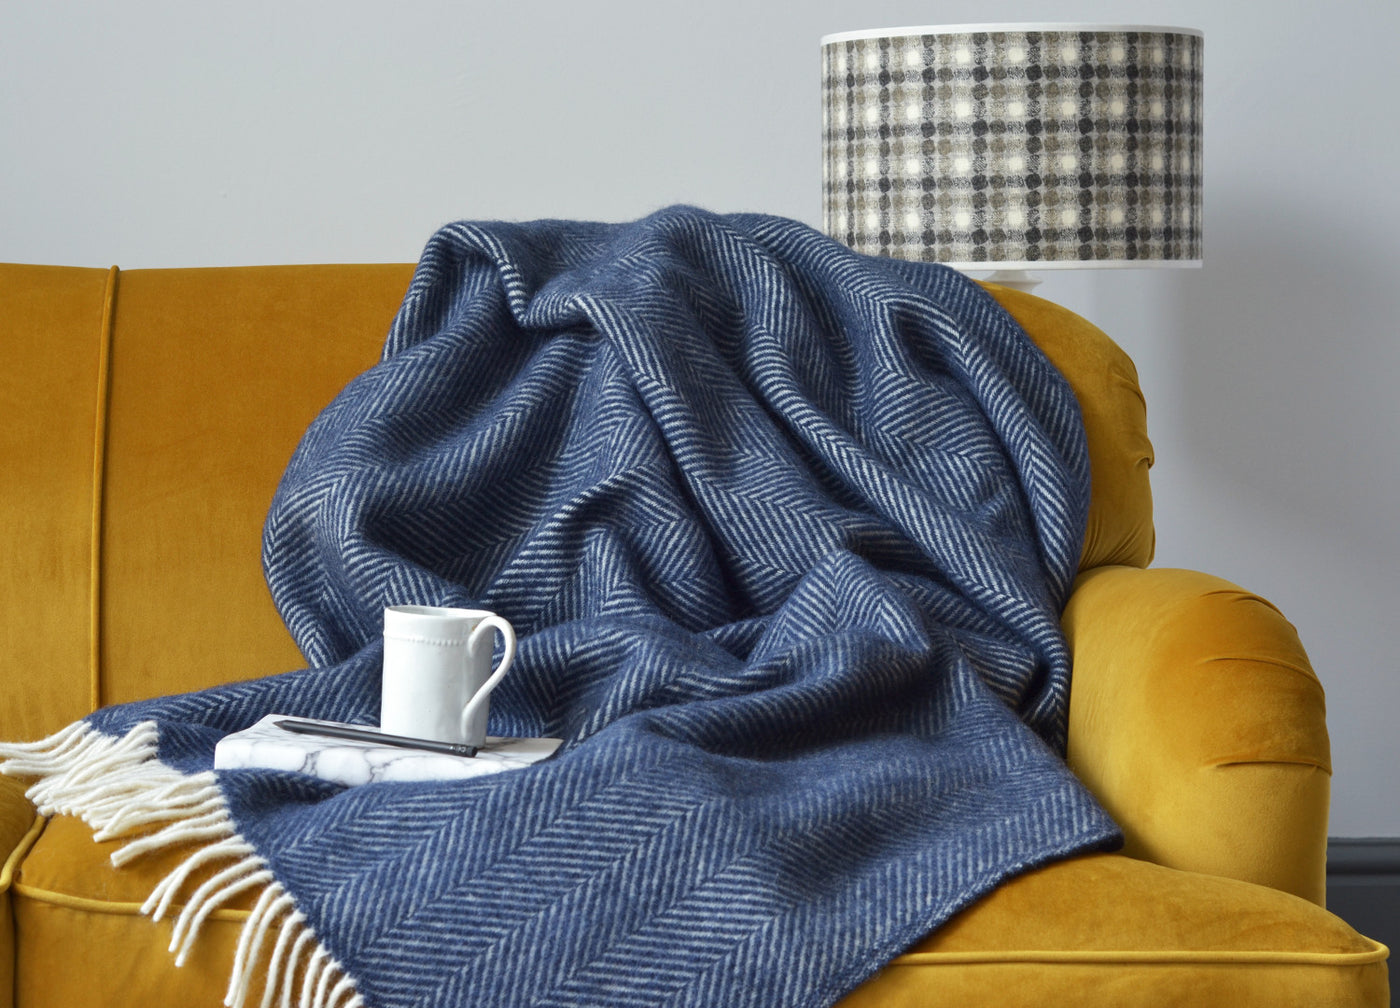 Large navy blue herringbone wool blanket draped over a yellow sofa. A mug and book are placed on top of the blanket